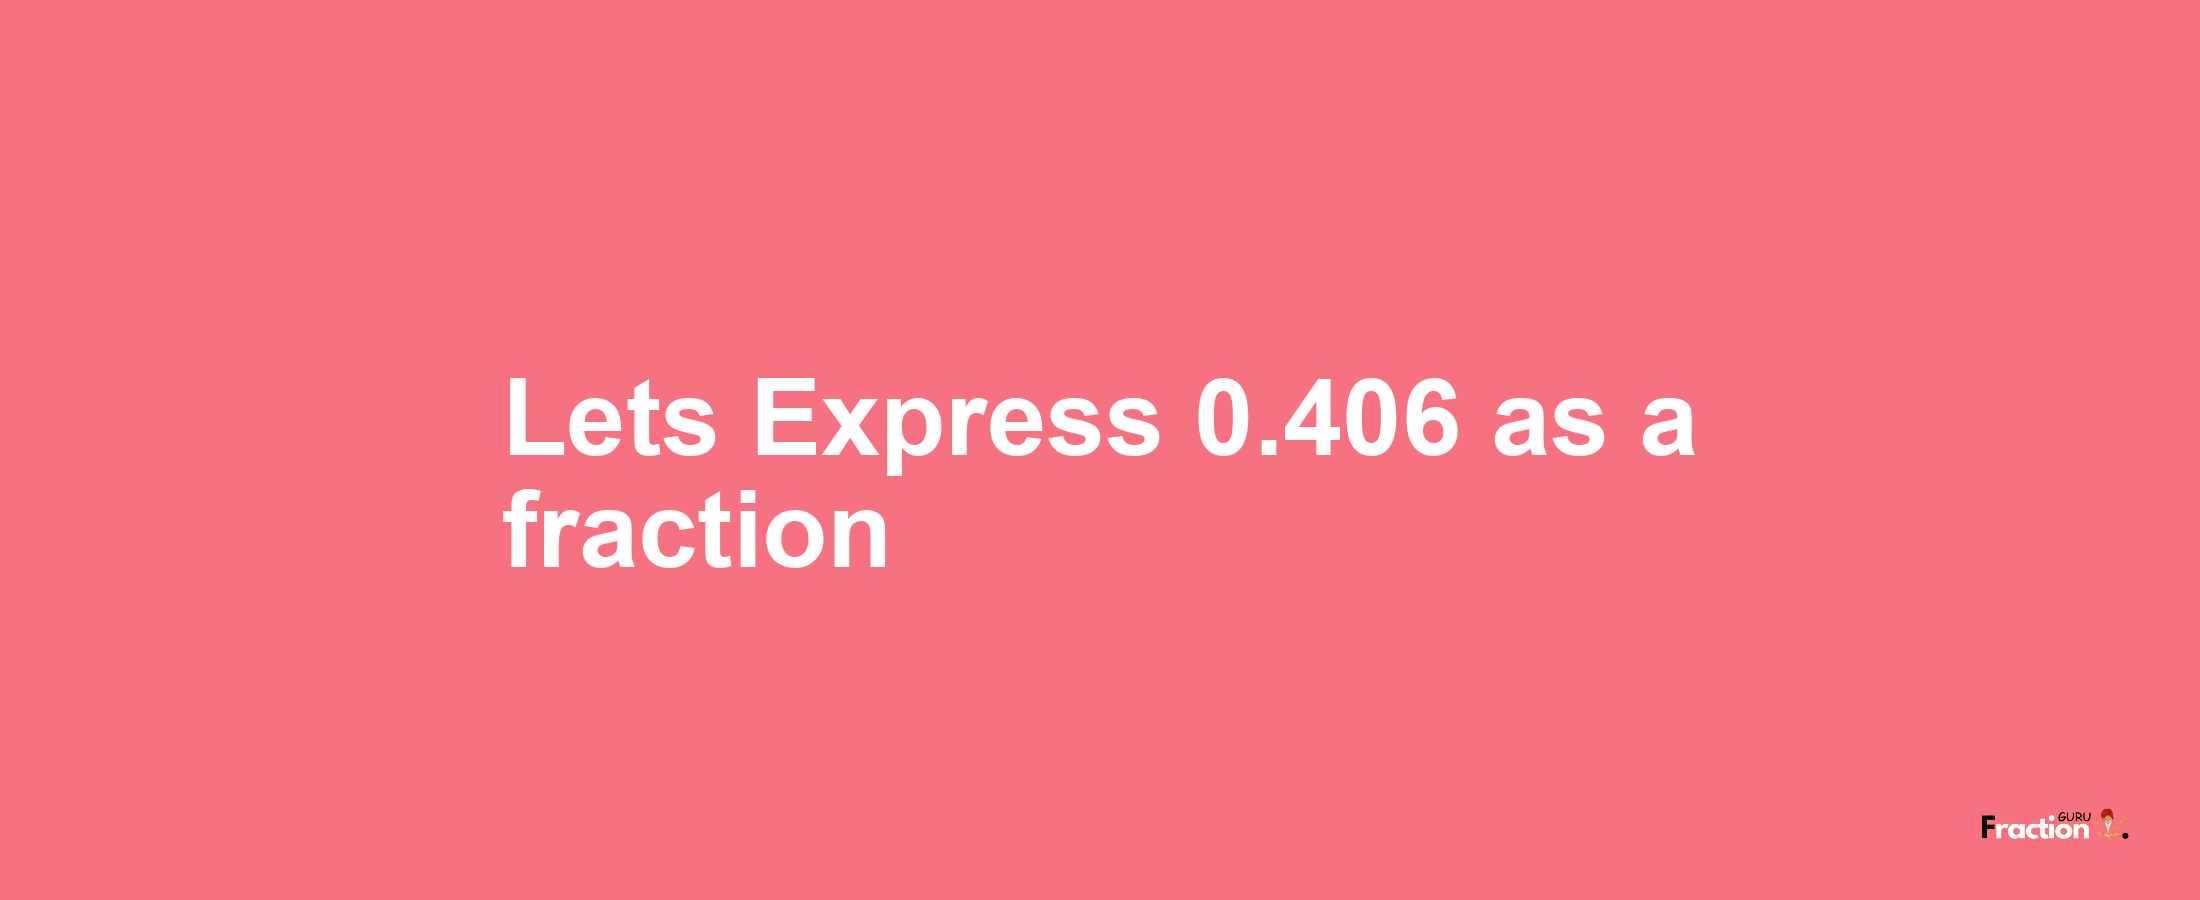 Lets Express 0.406 as afraction